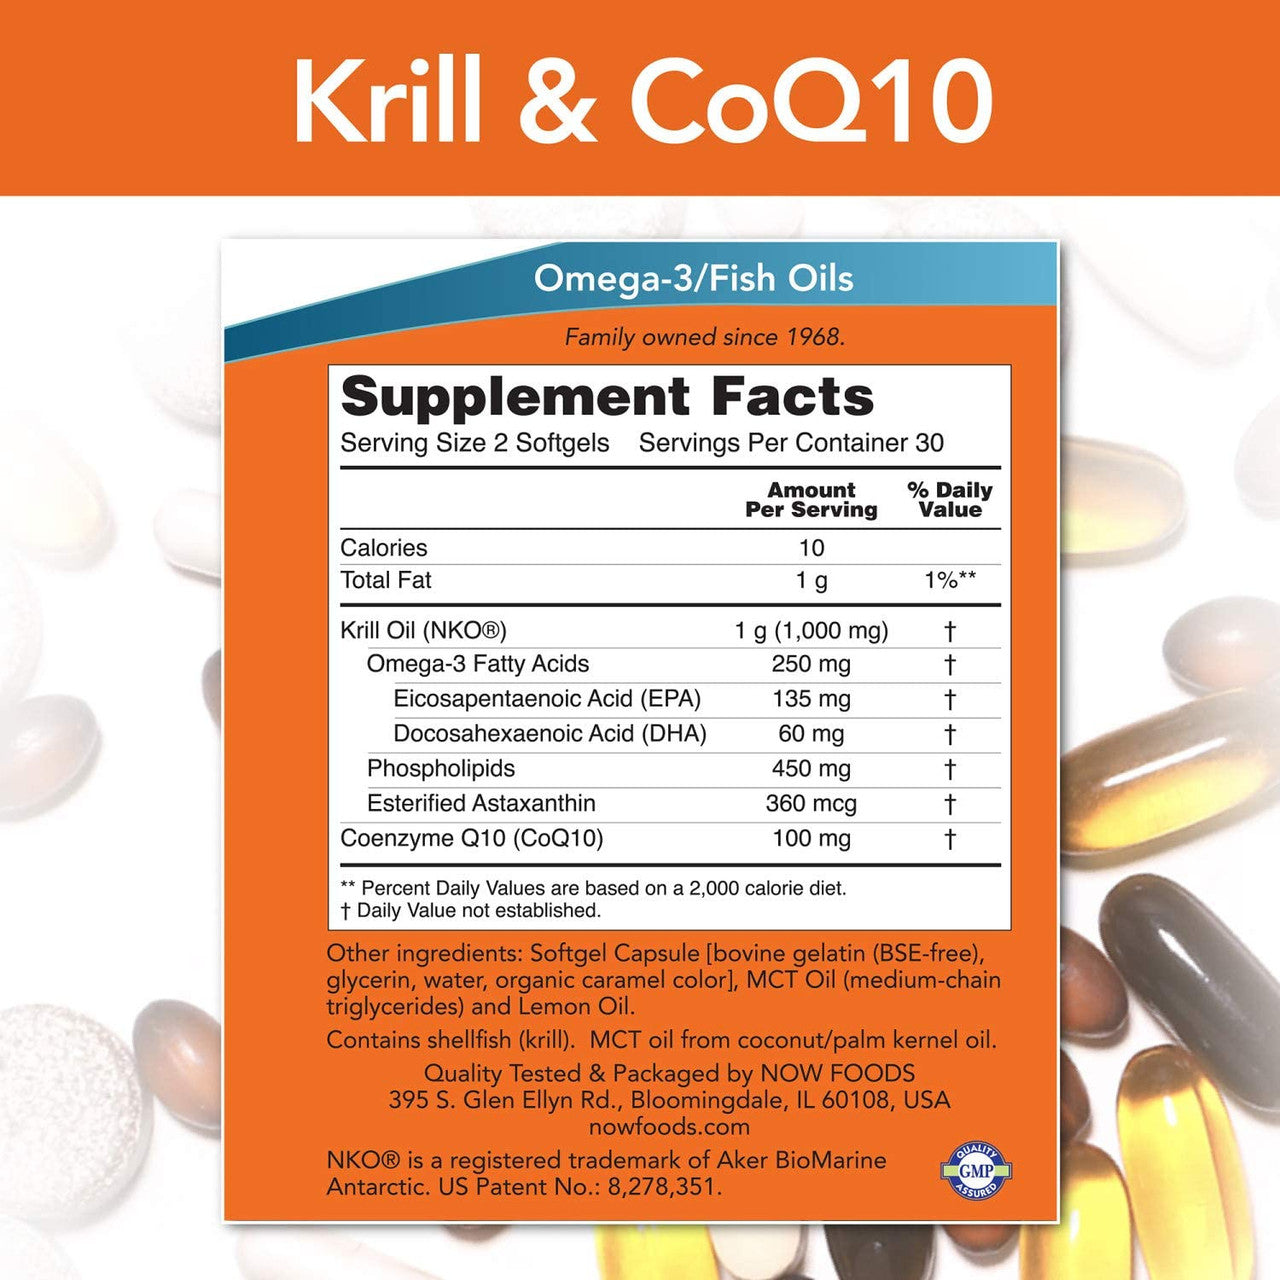 Now Krill & CoQ10 supplement facts